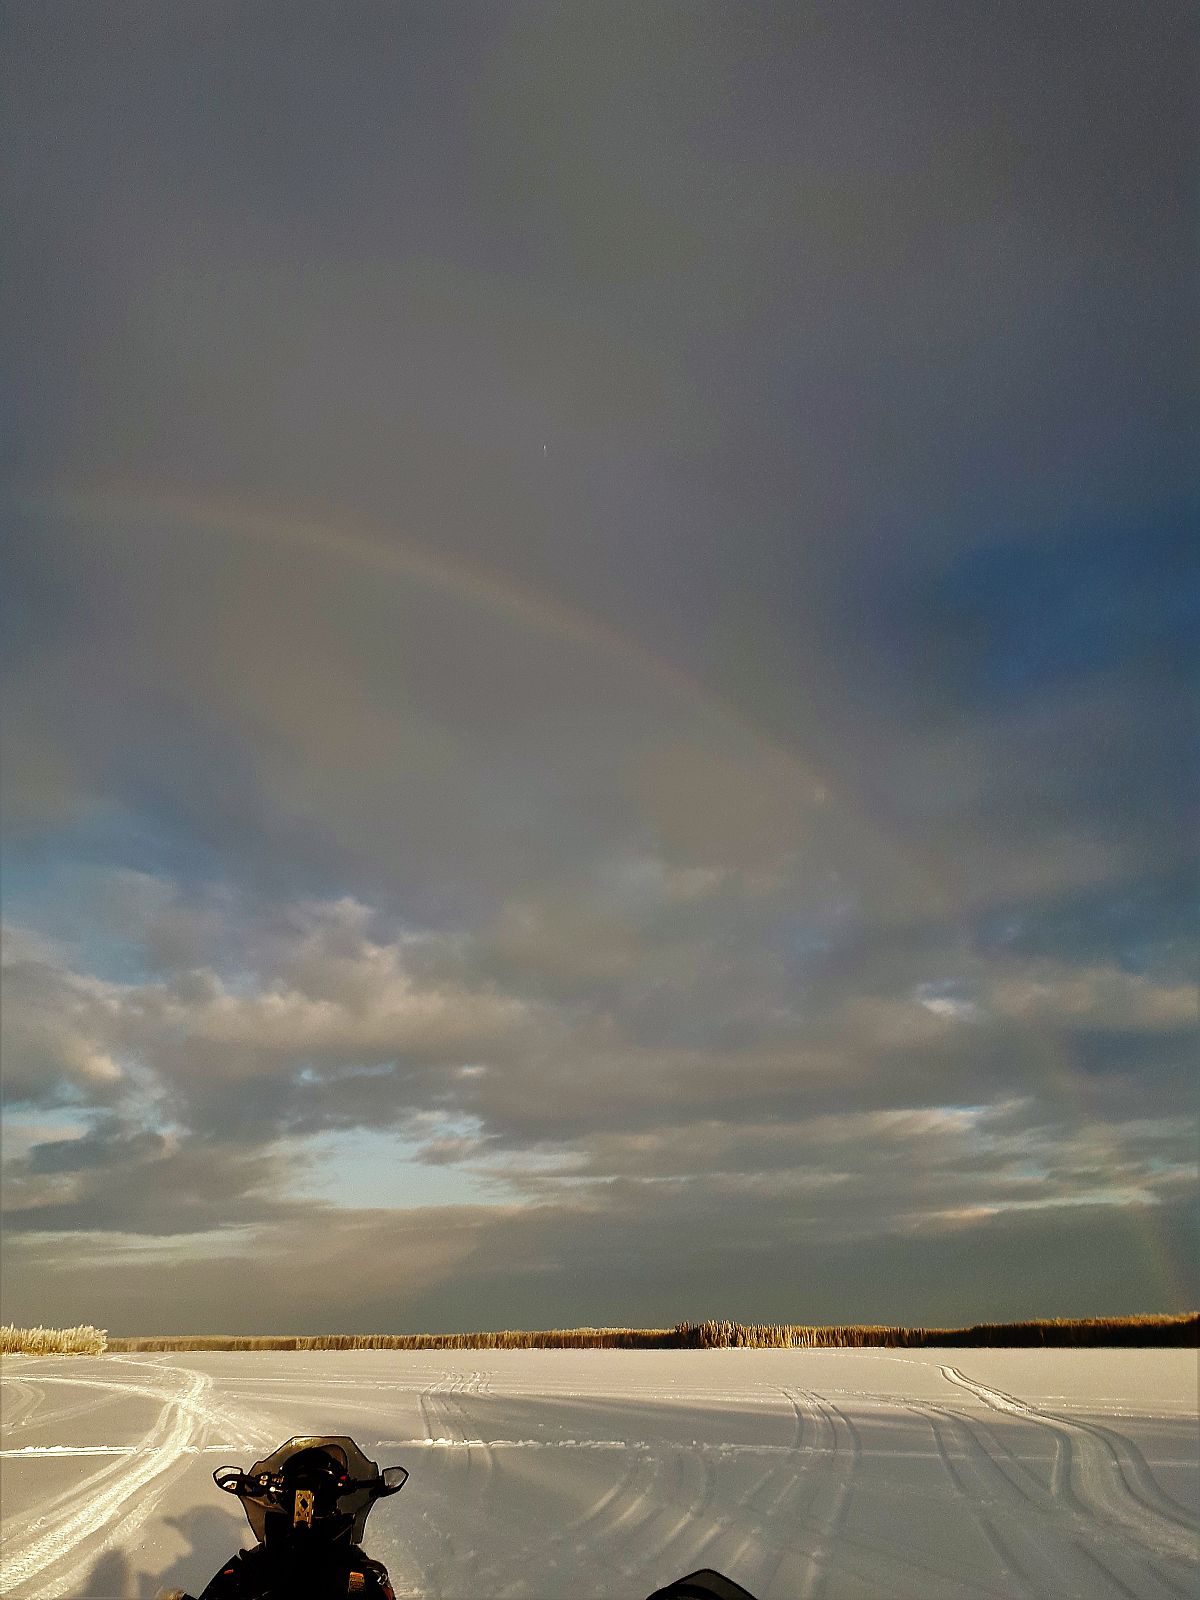 Snowmobiling in January with a rainbow overhead!